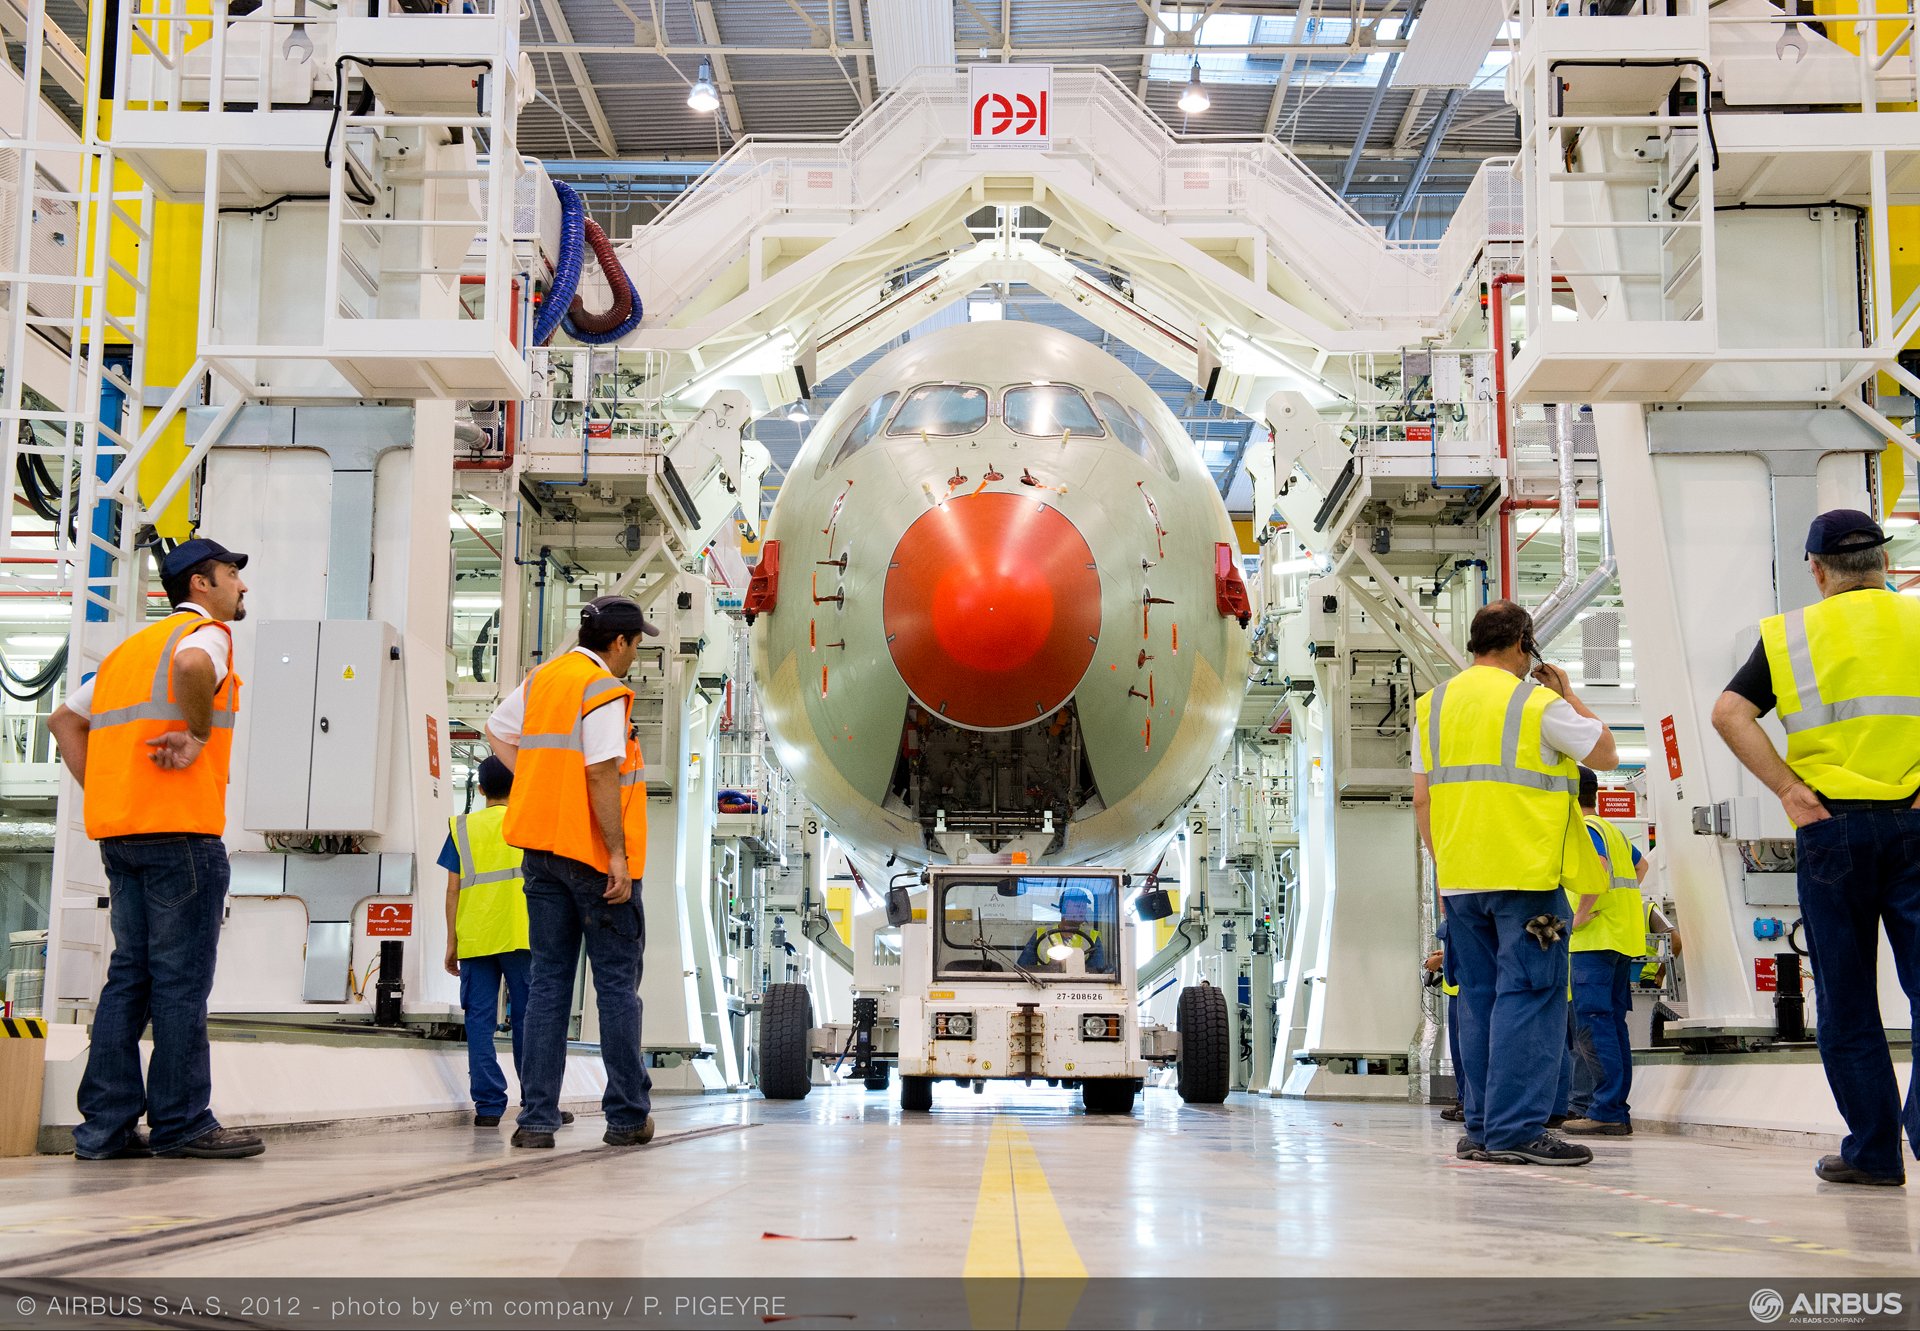 Final Assembly And Tests How Is An Aircraft Built Airbus